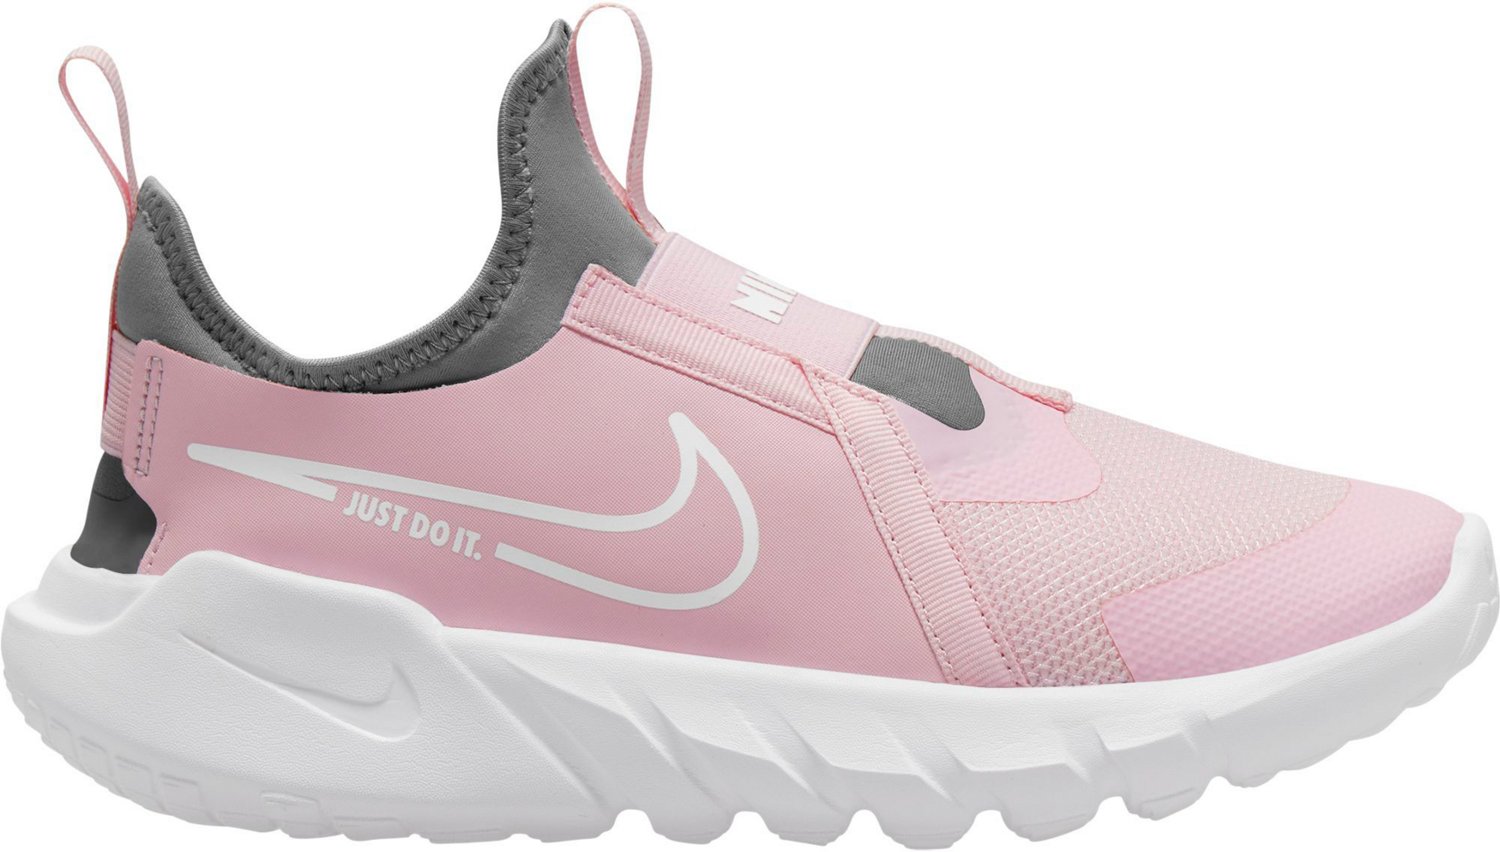 Nike Kids\' Flex Runner 2 GS Shoes | Free Shipping at Academy